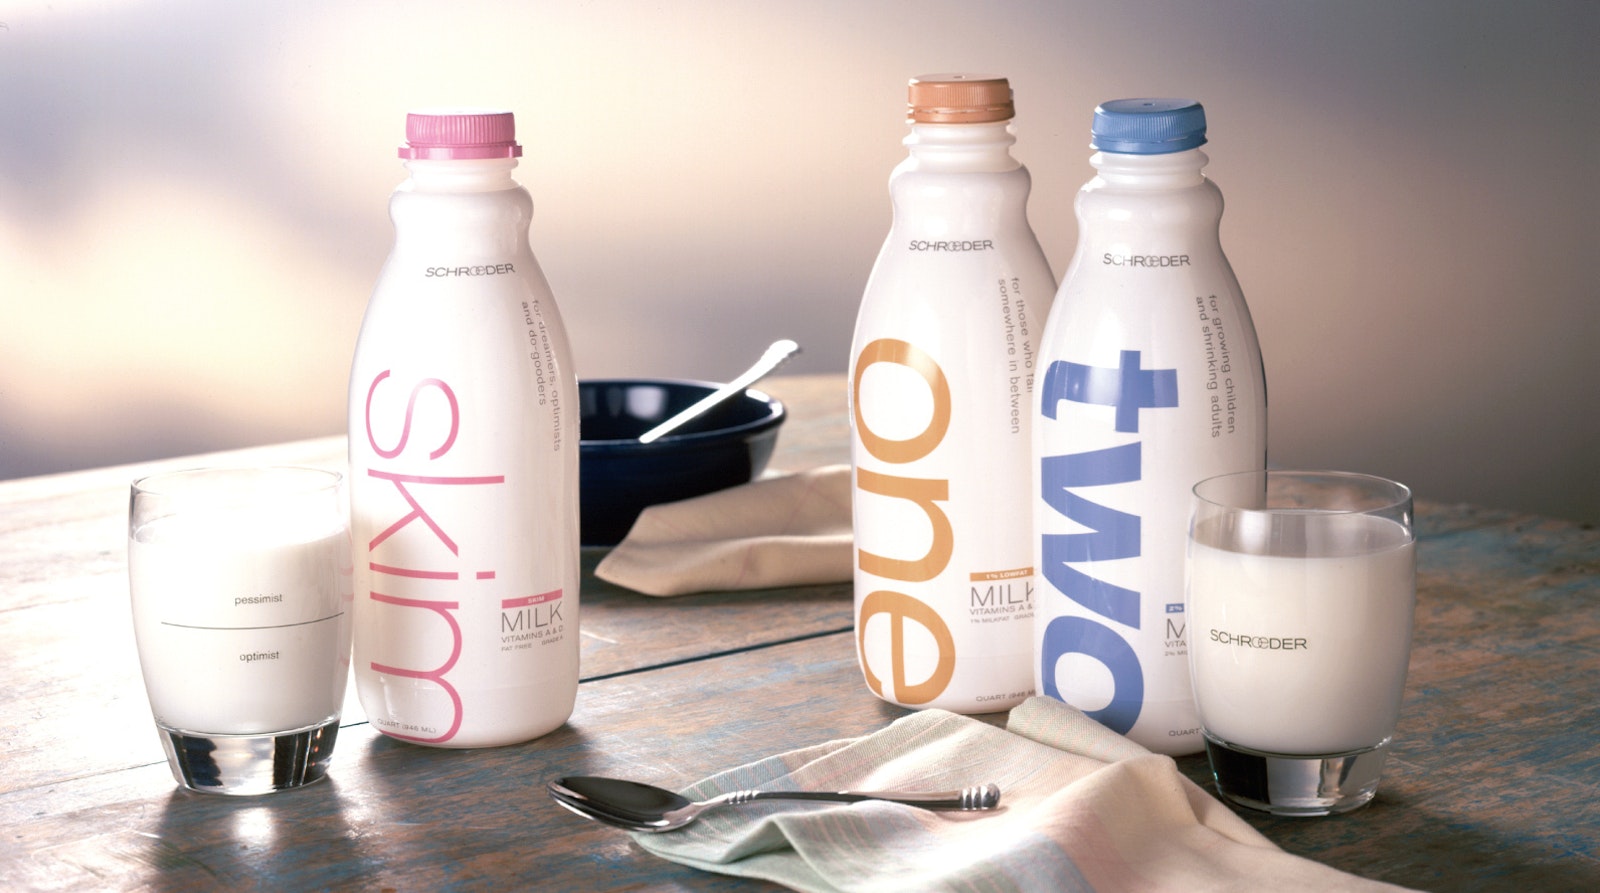 Promotional Schroeder milk bottle and product photography with three milk flavor designs and branding.